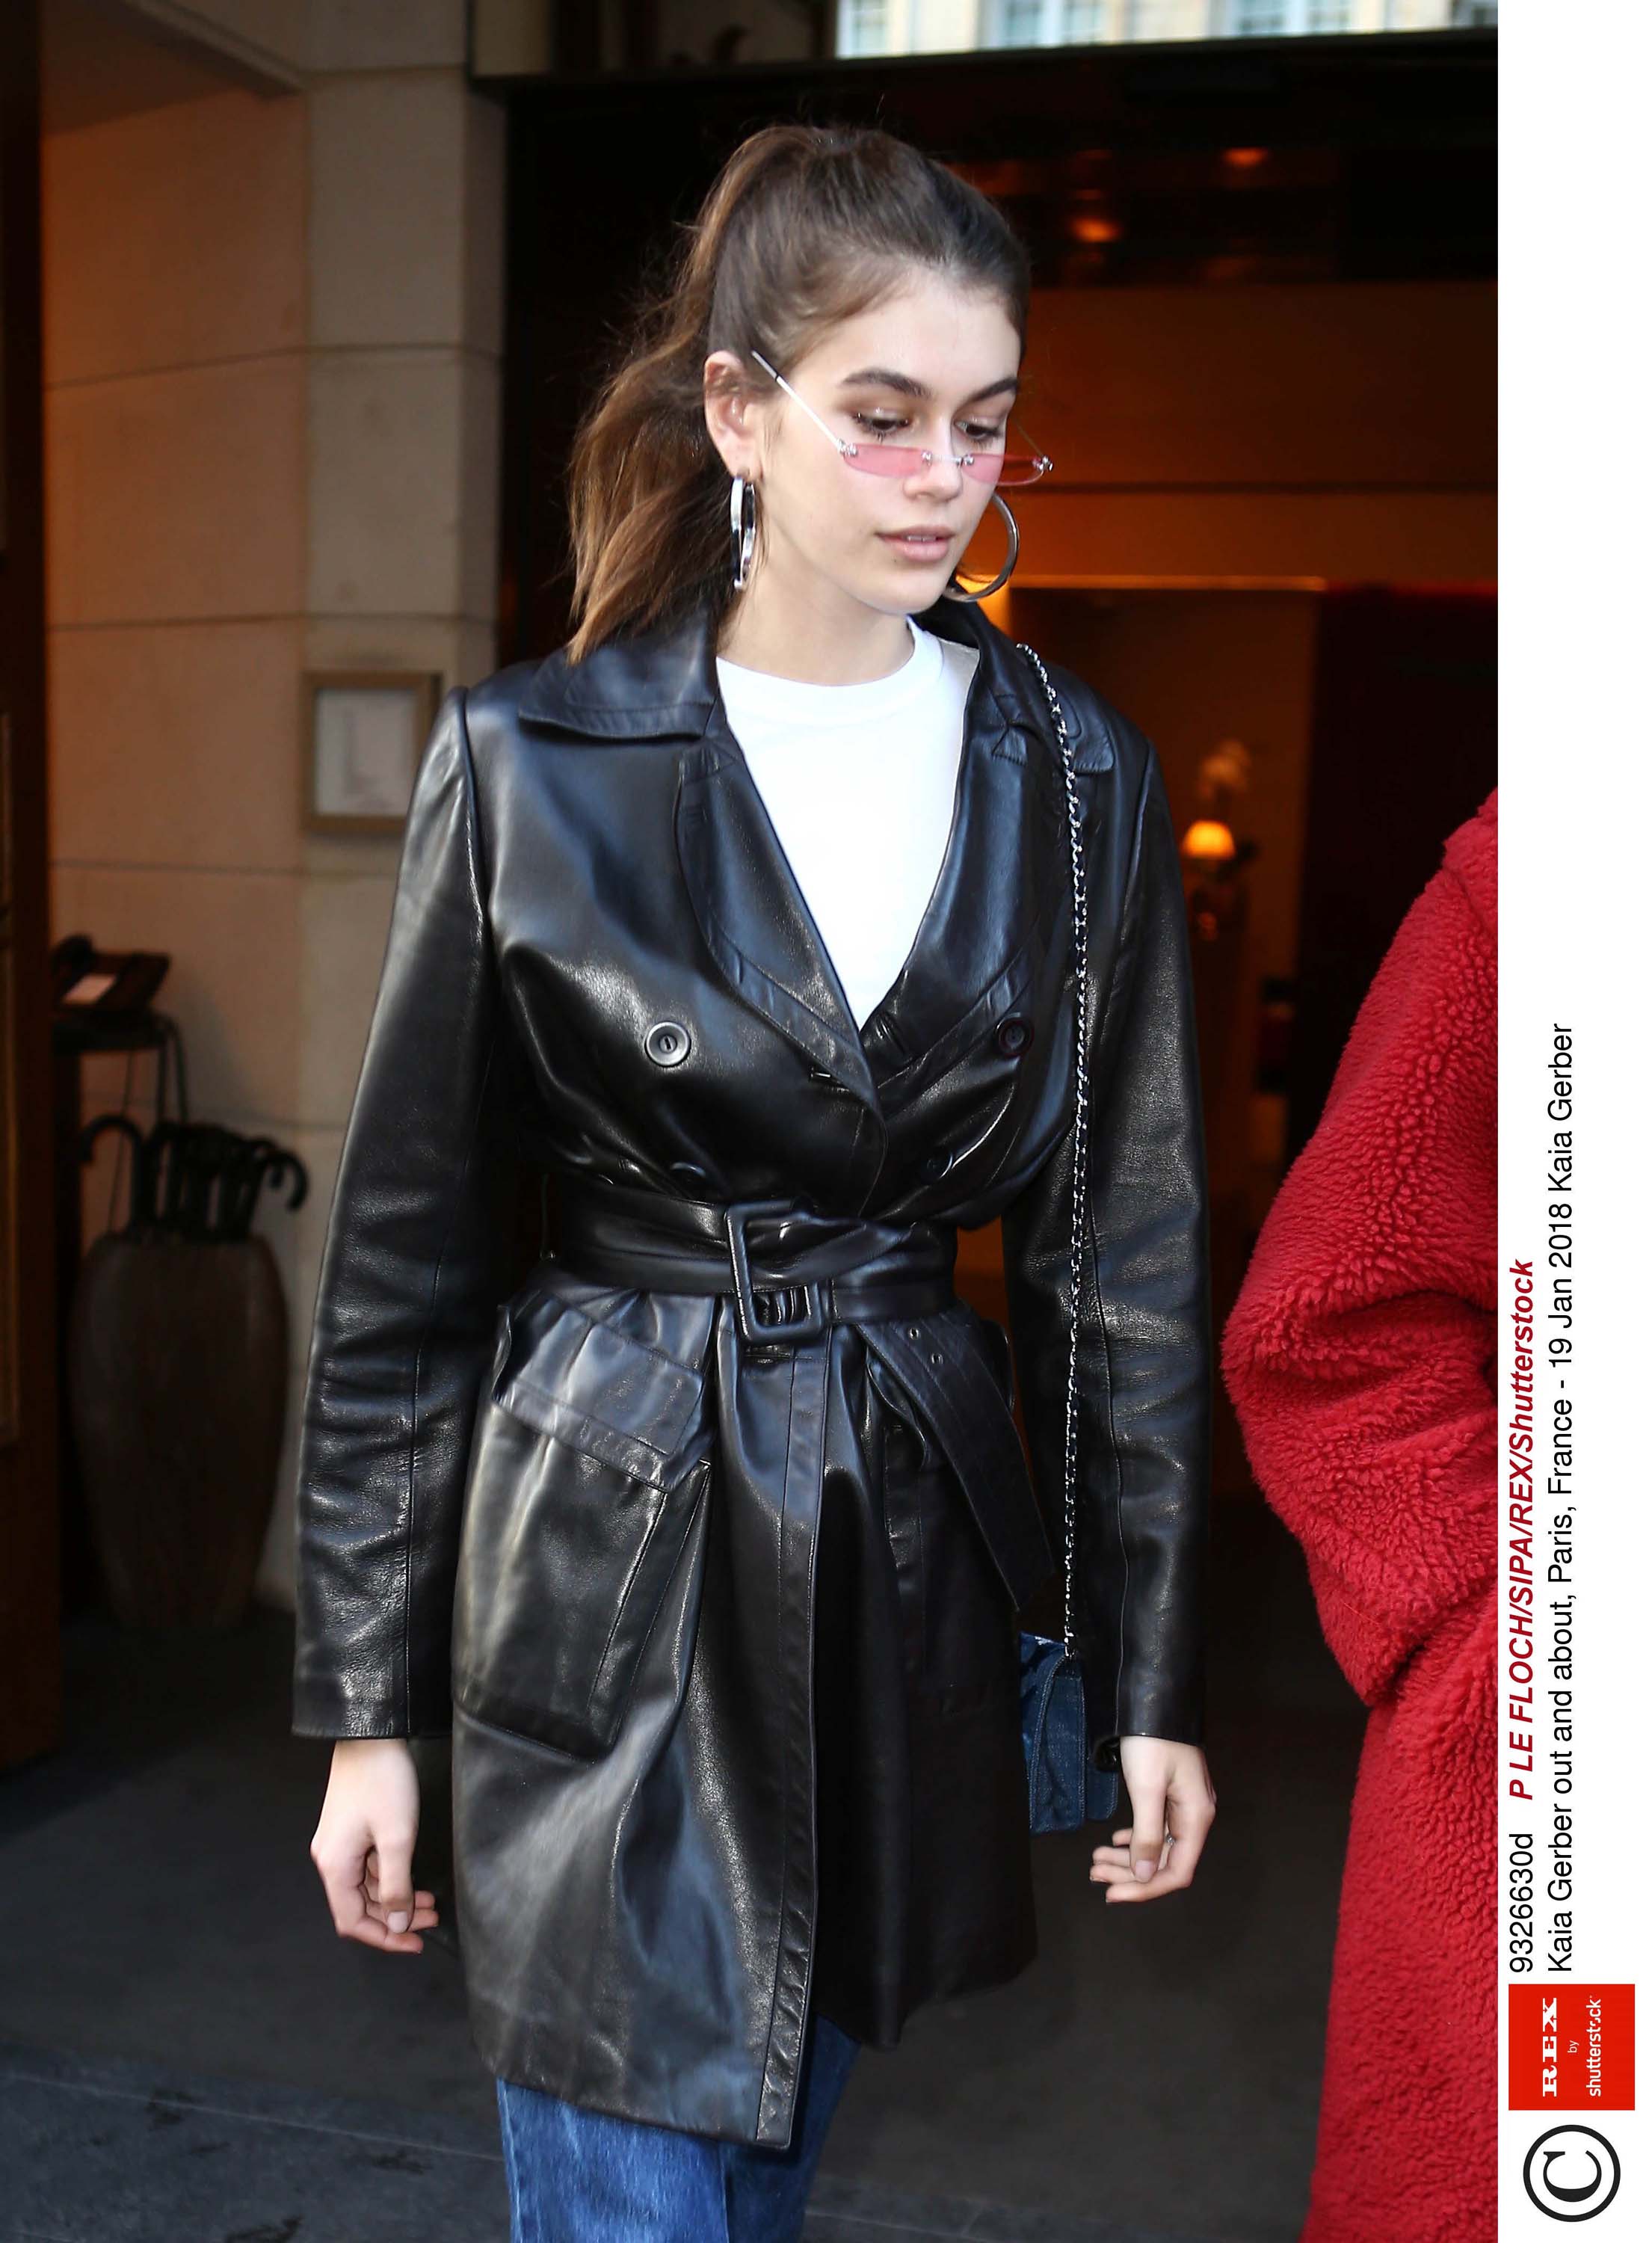 Kaia Gerber is seen out and about in Paris